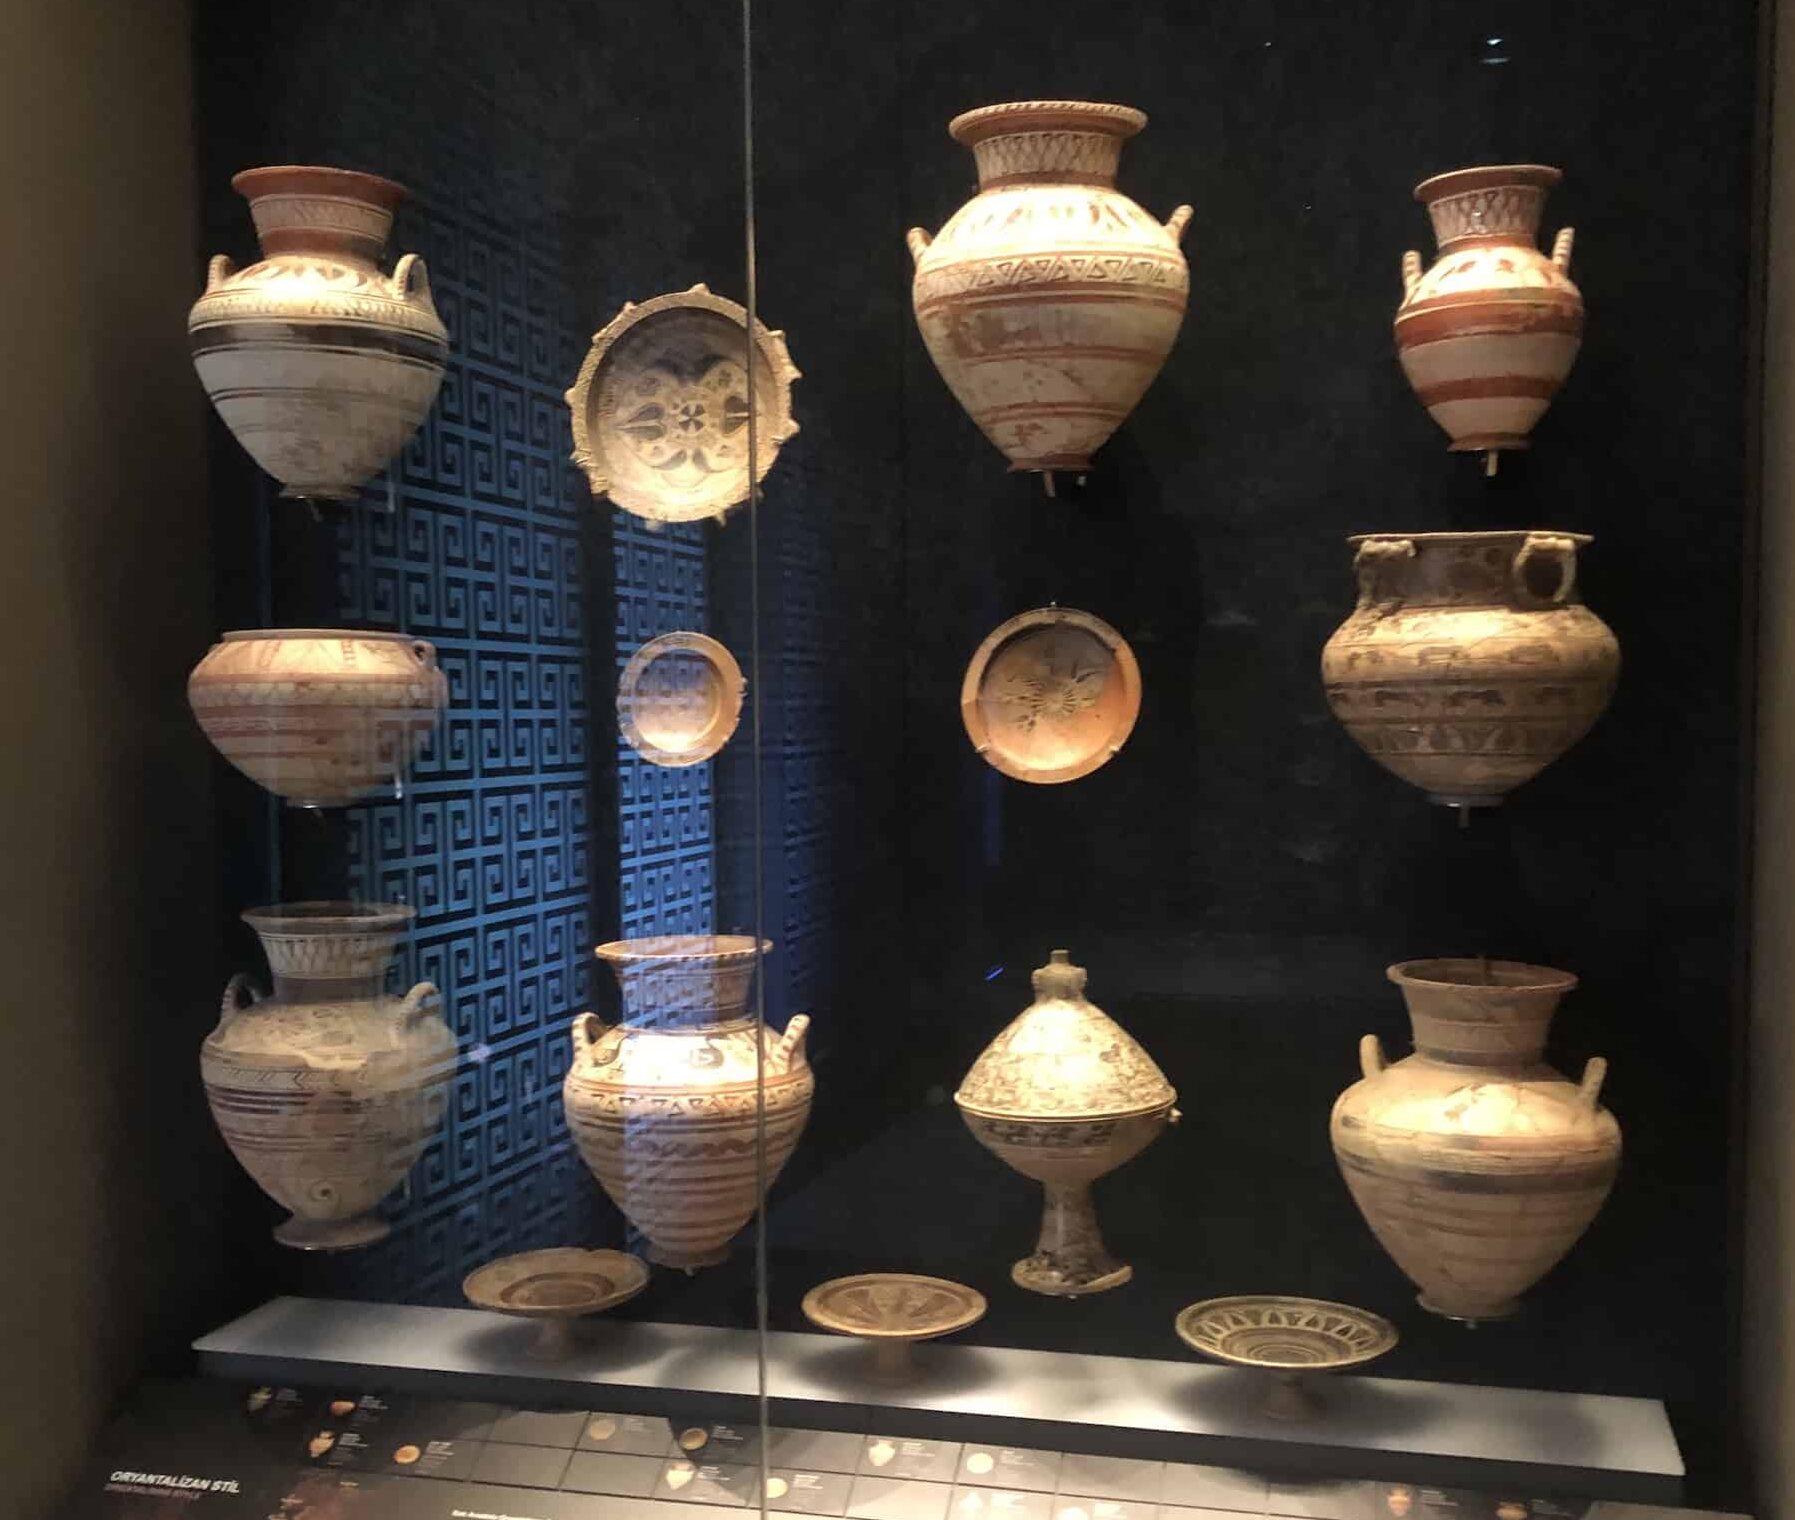 Orientalizing style pottery at the Istanbul Archaeology Museum in Istanbul, Turkey